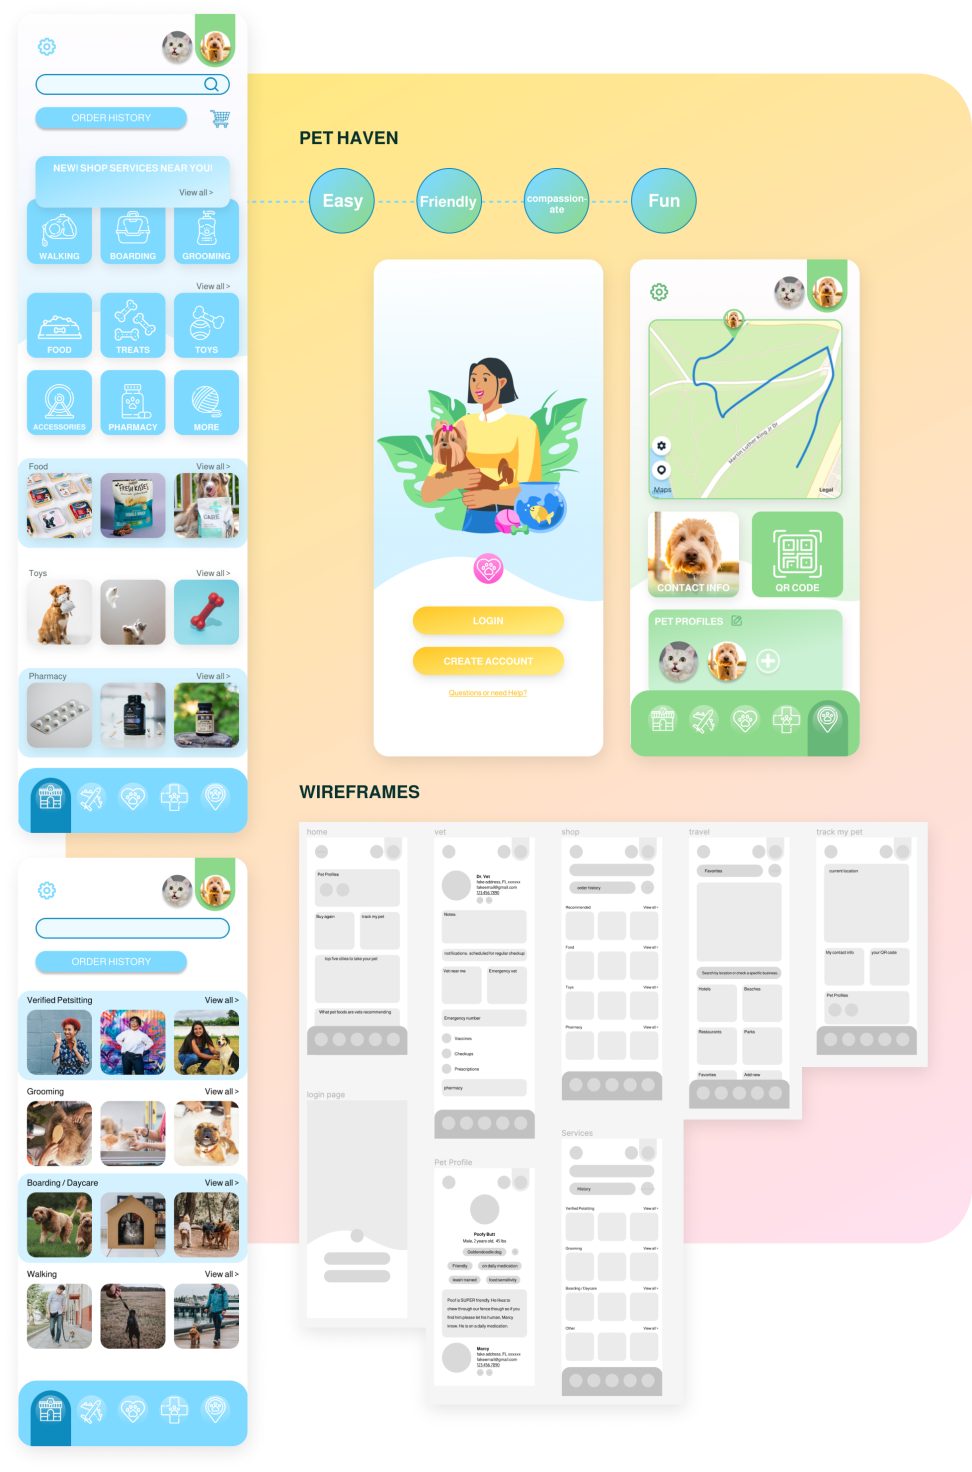 Pet Haven app concept and UI design. iPhone mockups of the light theme and primary color design of a conceptual pet care app case study.